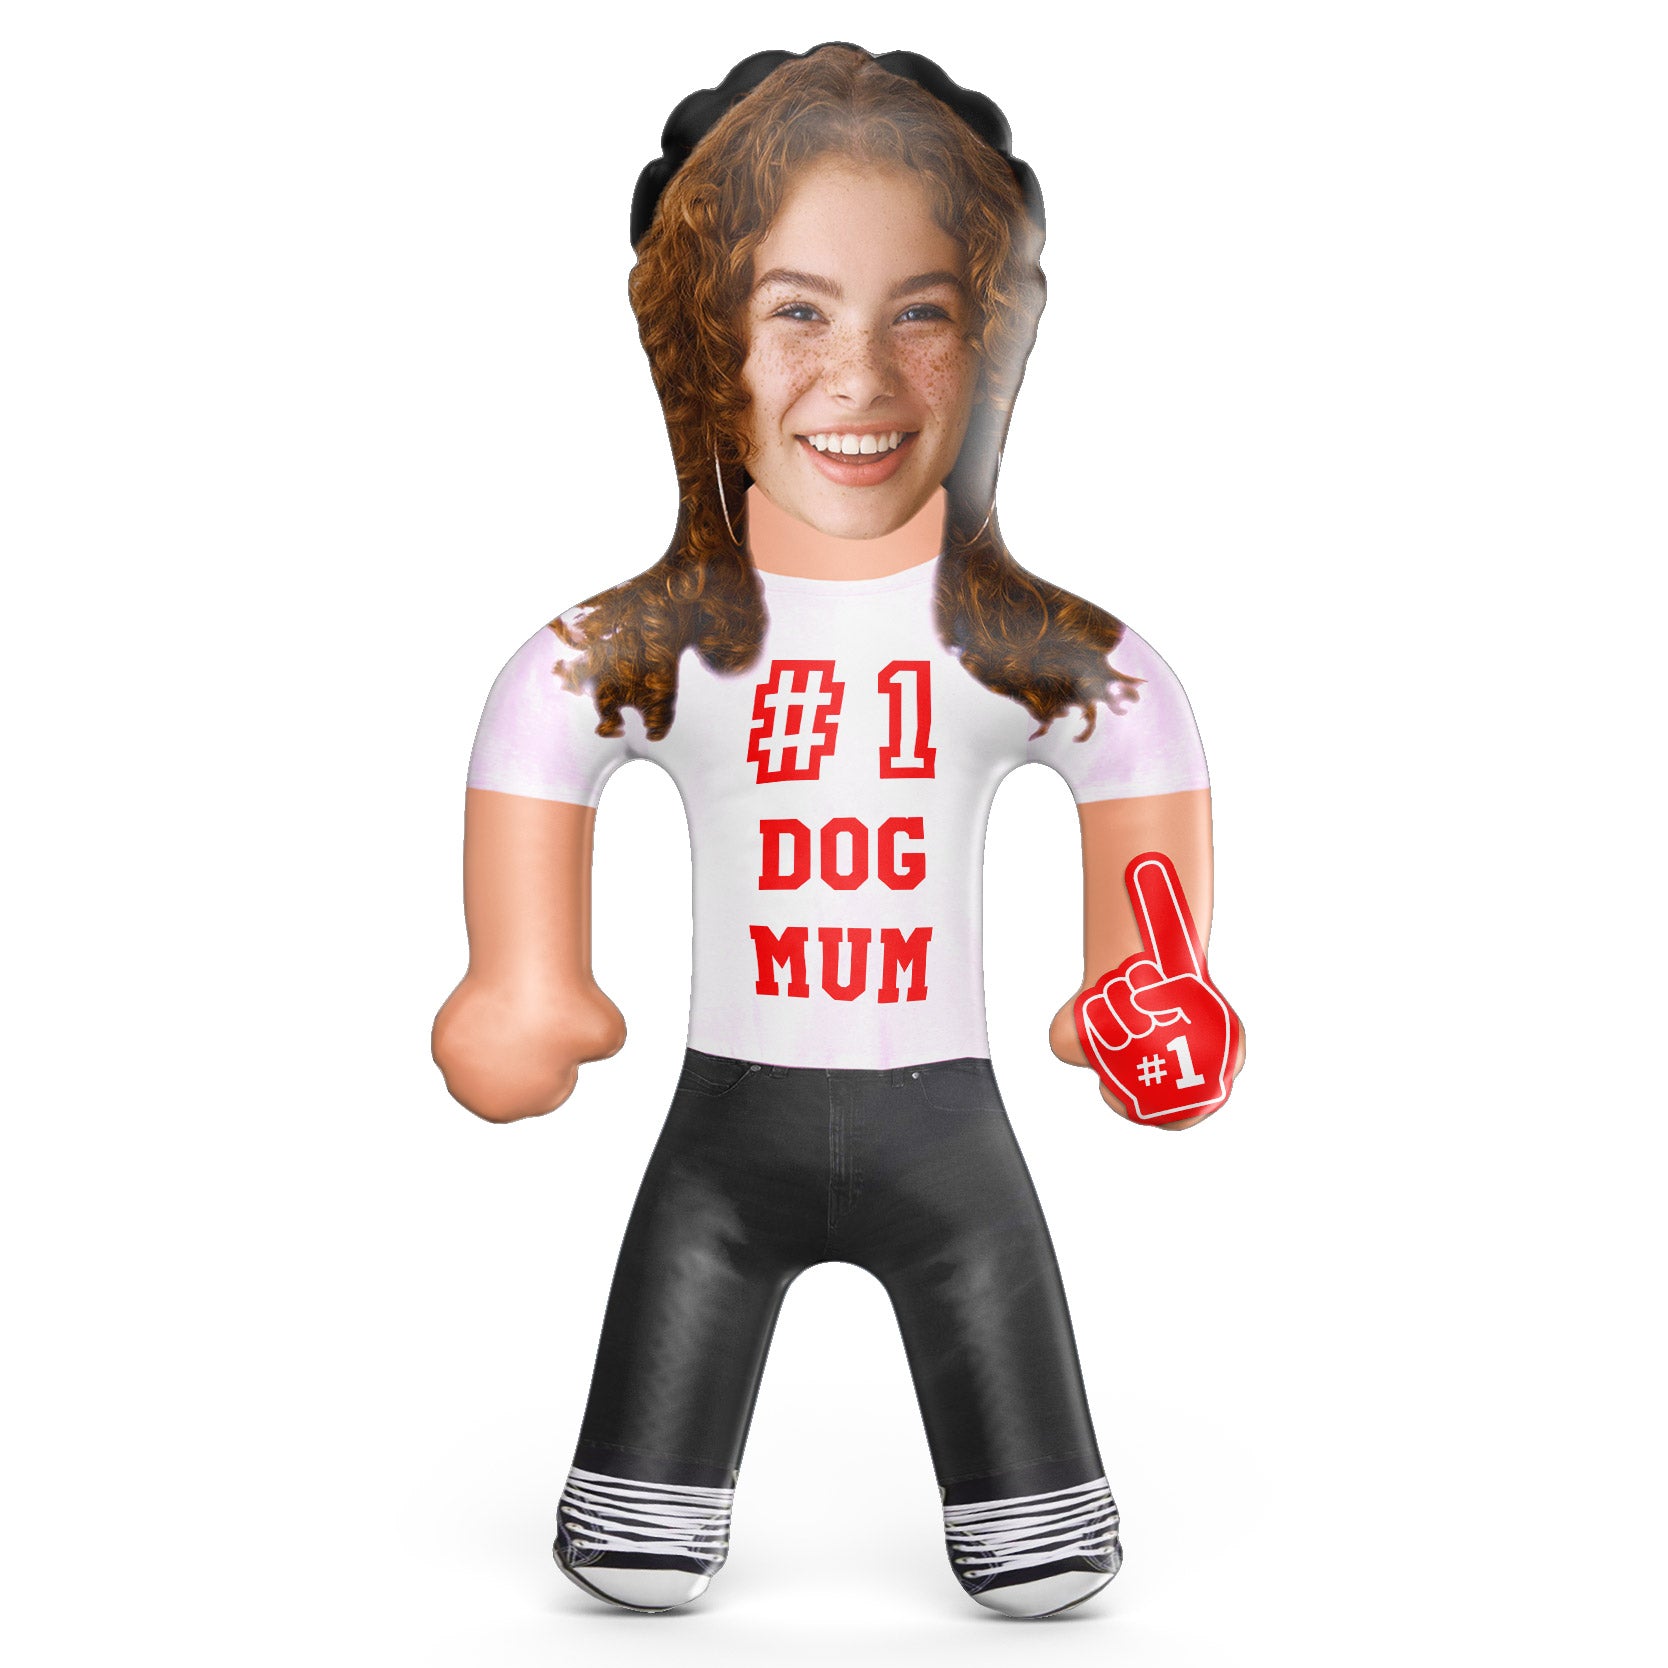 Dog Mum Inflatable Doll - Custom Blow Up Doll